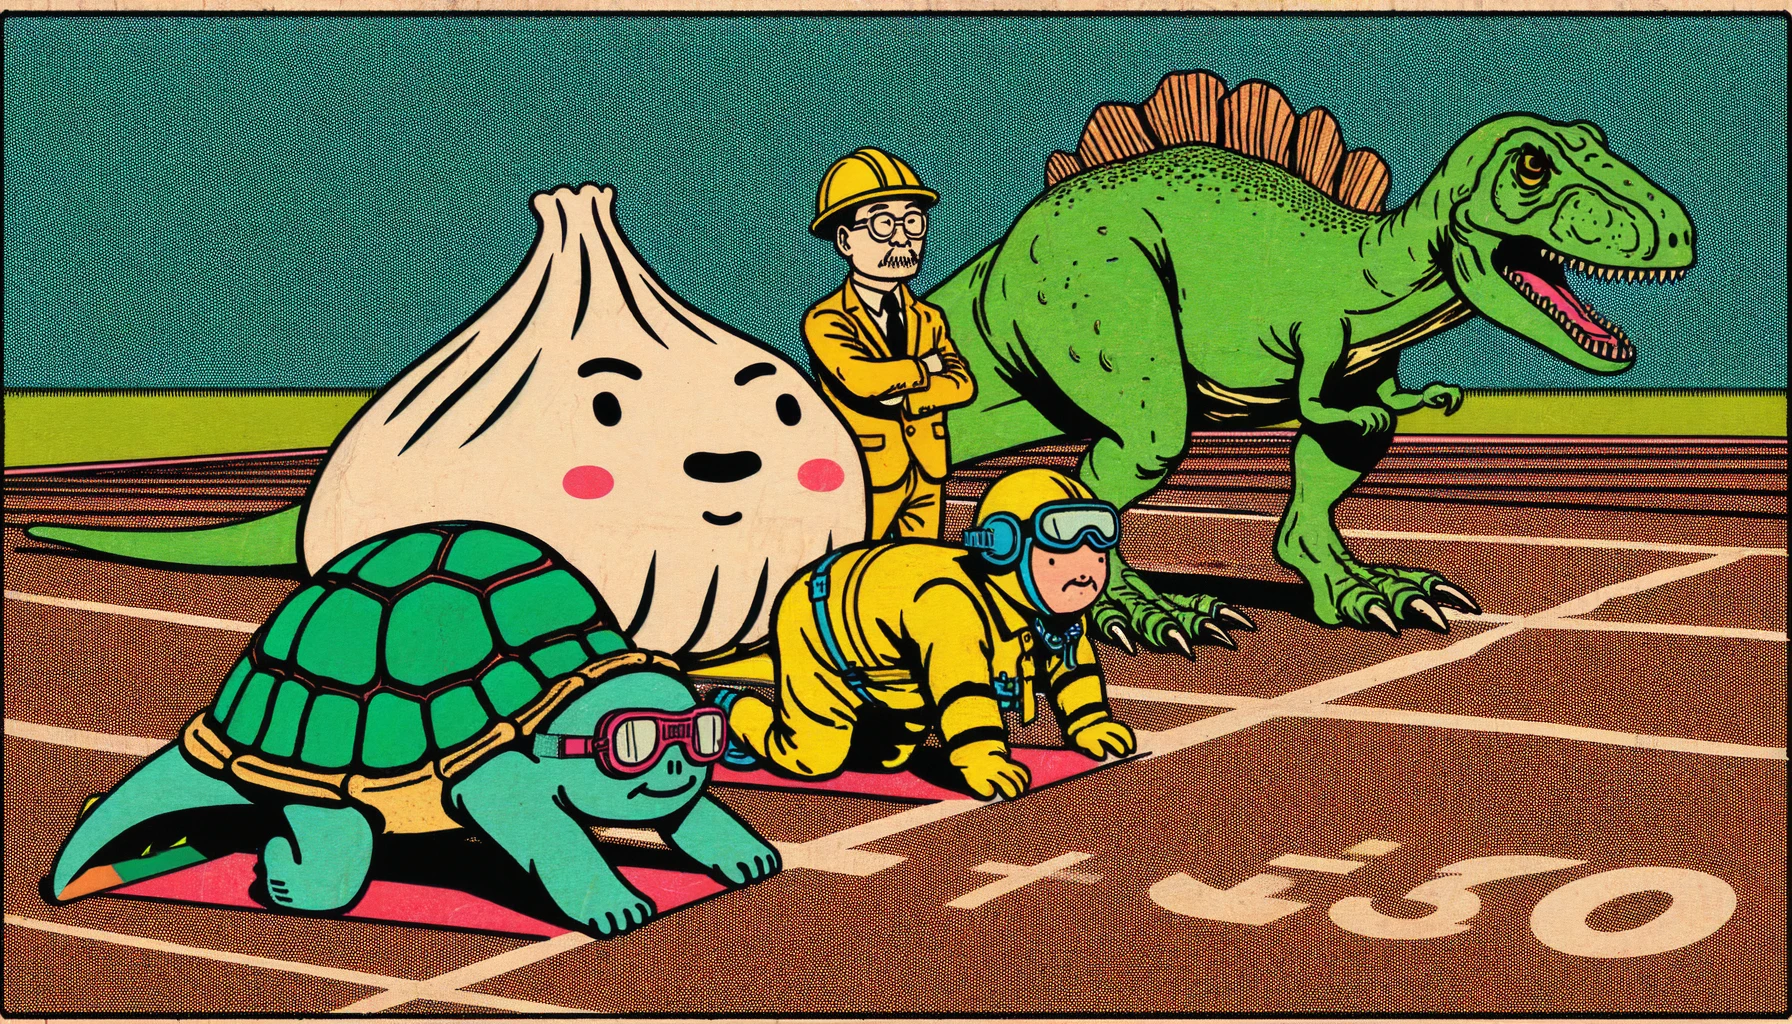 Runners at the starting blocks featuring an anthropomorphic Chinese dumpling, a cartoon brontosaurus, a construction worker in hi-viz, and a turtle wearing flight goggles